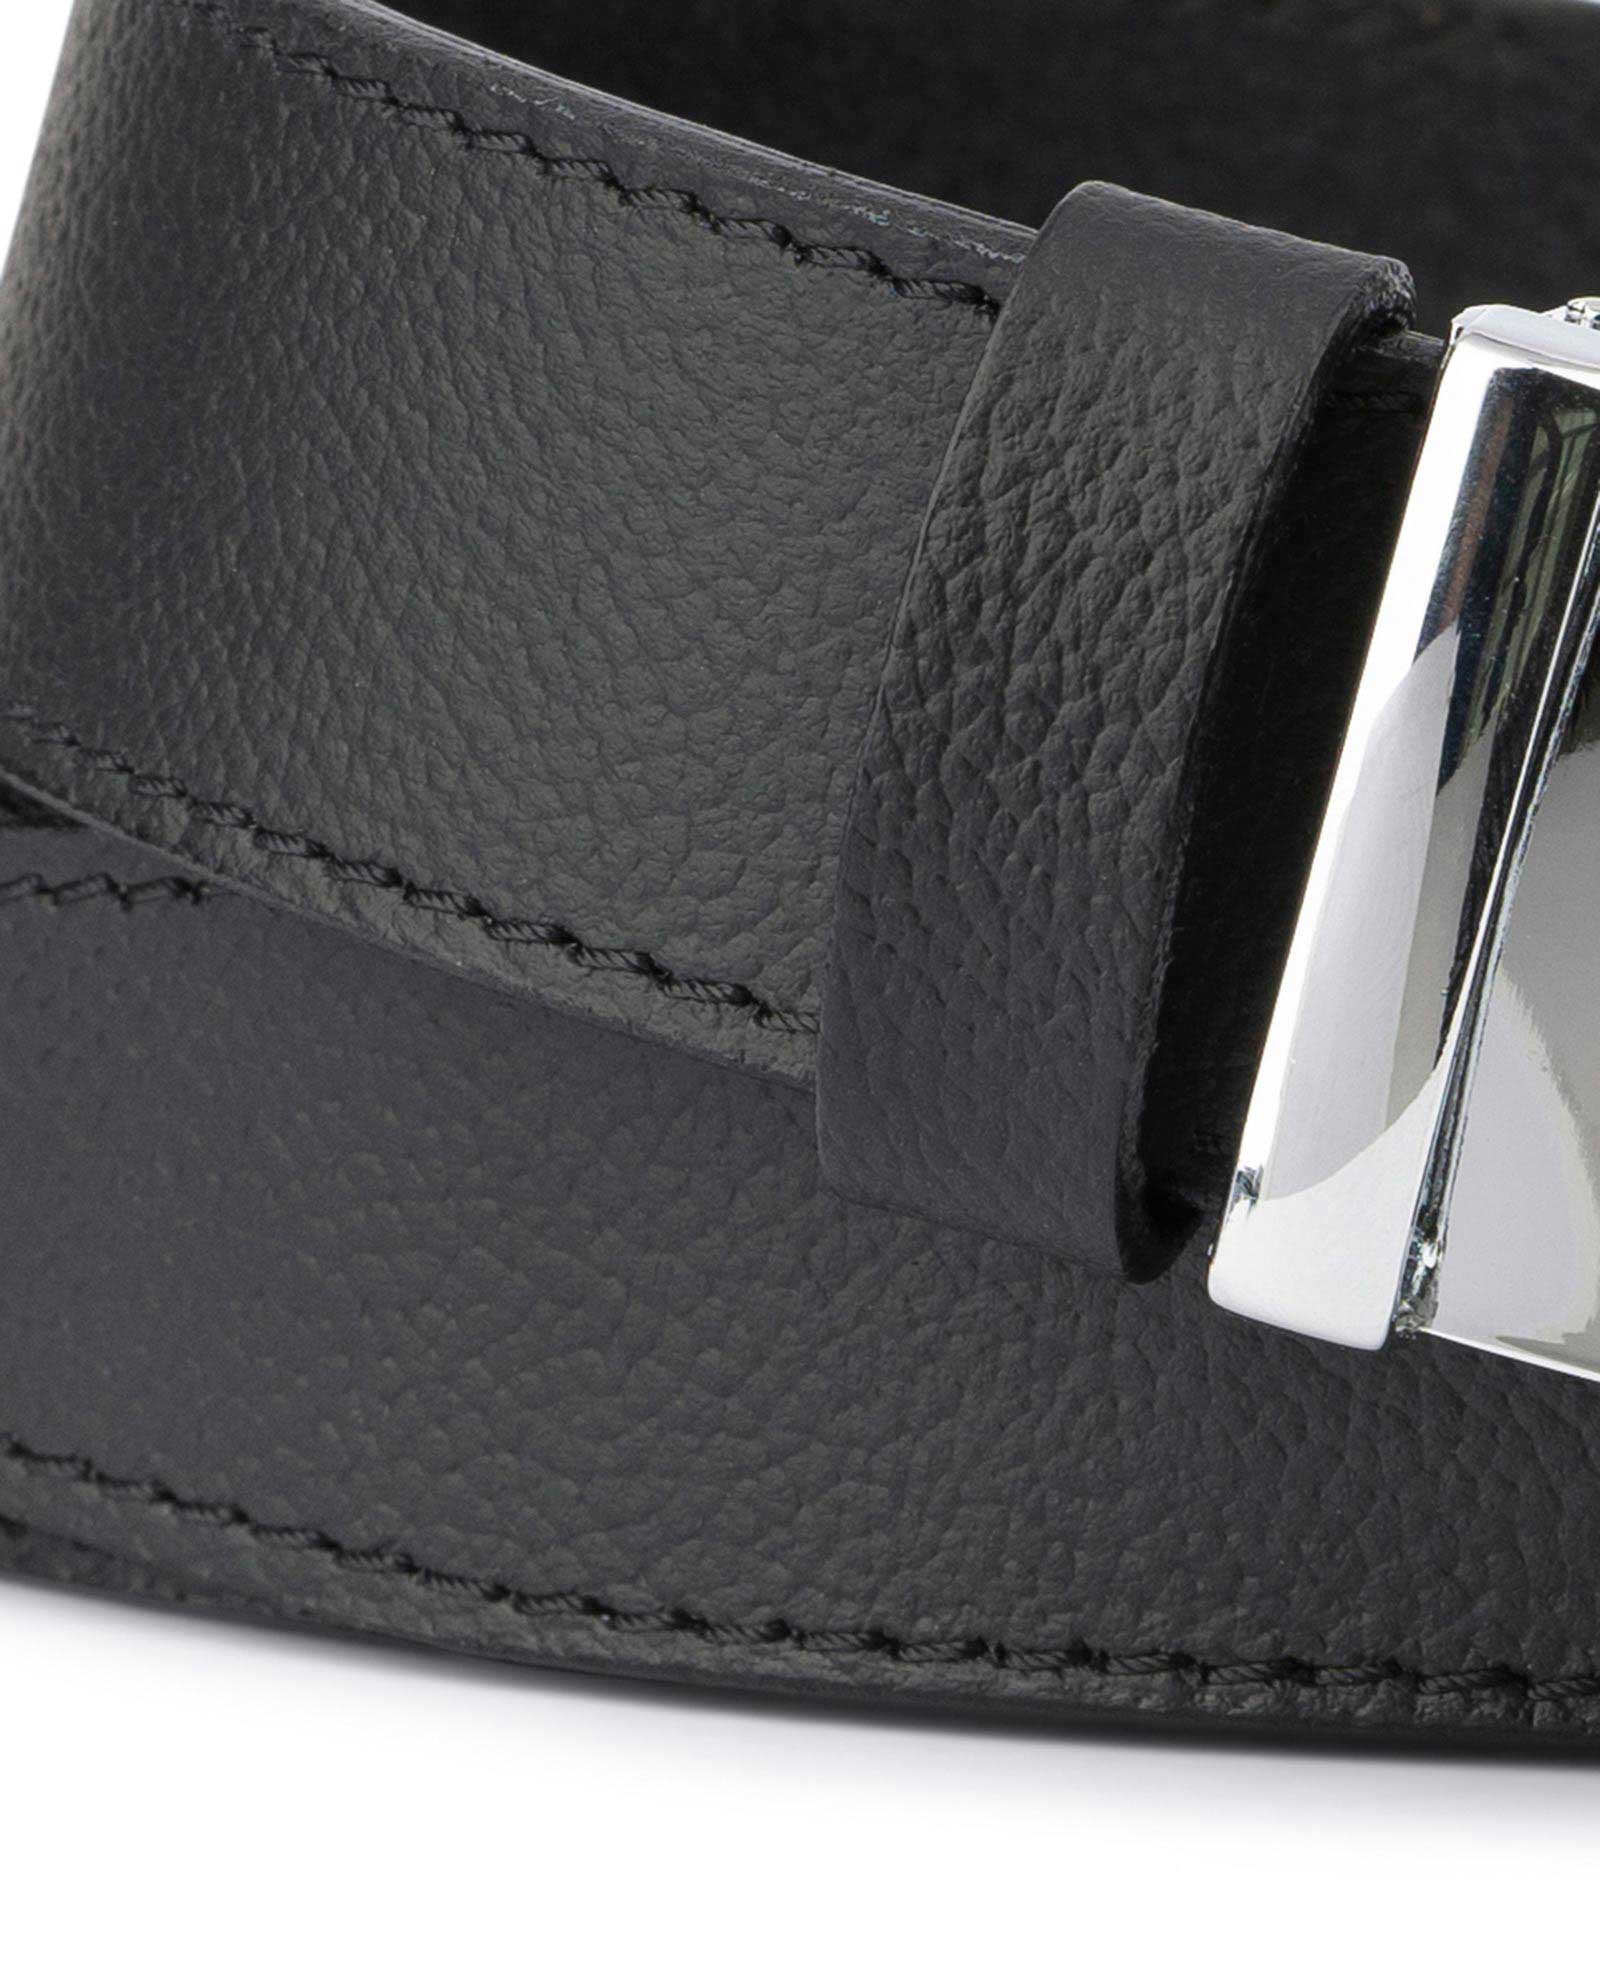 Costyle New Style Comfort Click Belt Men Automatic Adjustable Leather  Belts, Black